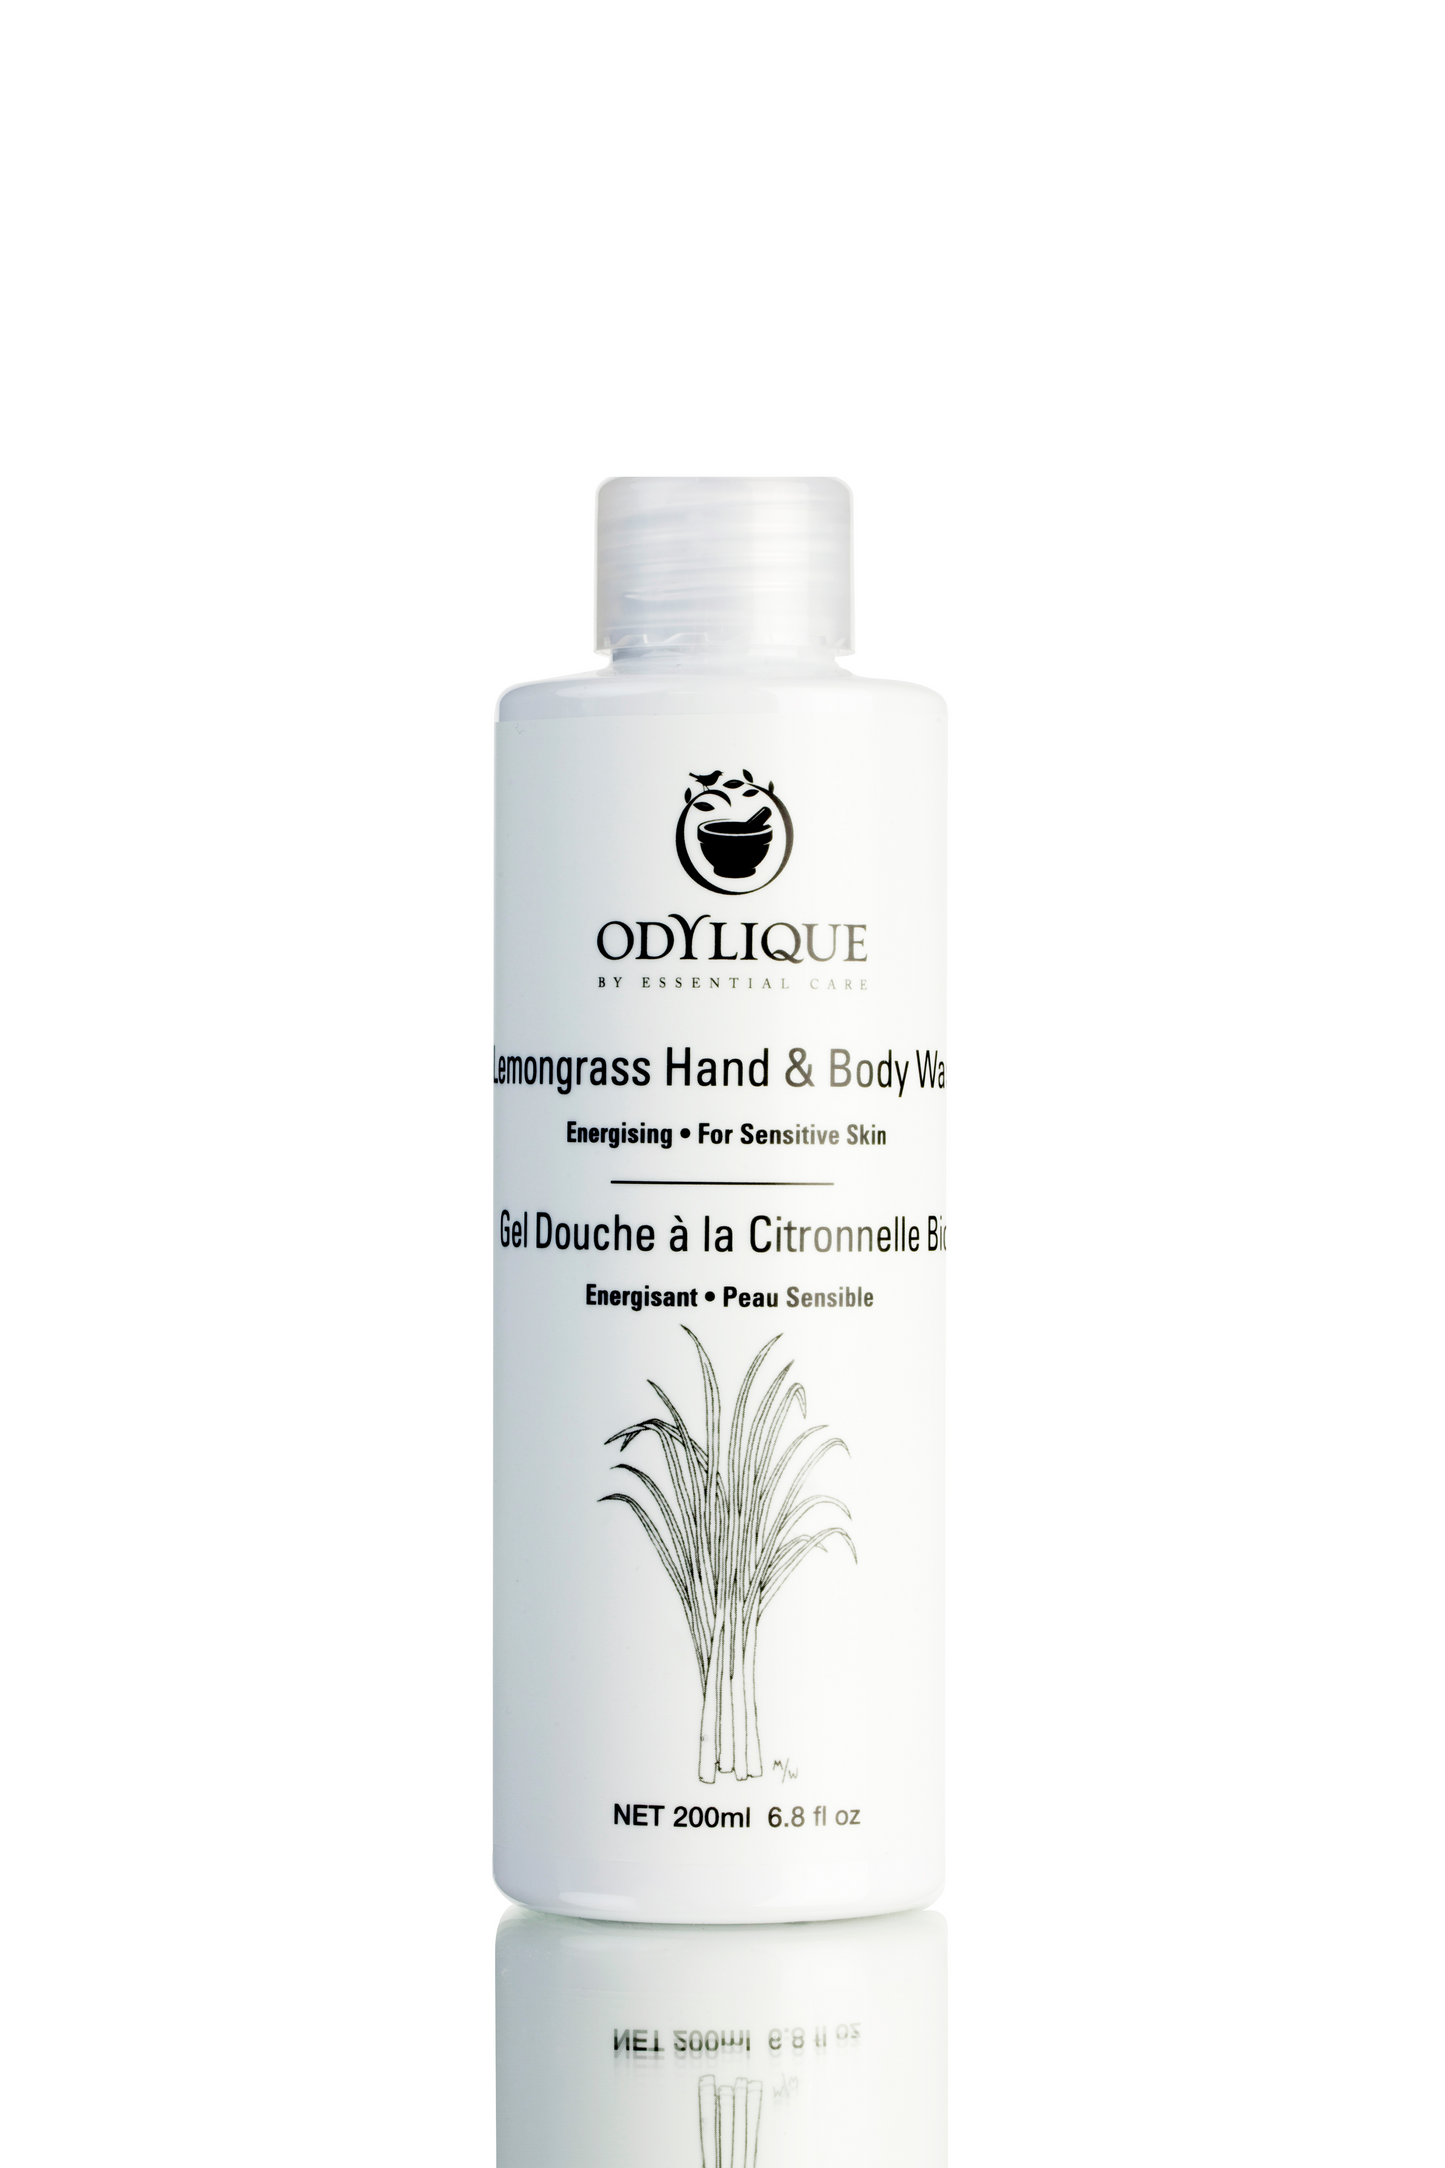 Odylique Lemongrass Hand and Body Wash for sensitive skin. Sulfate free, all natural.